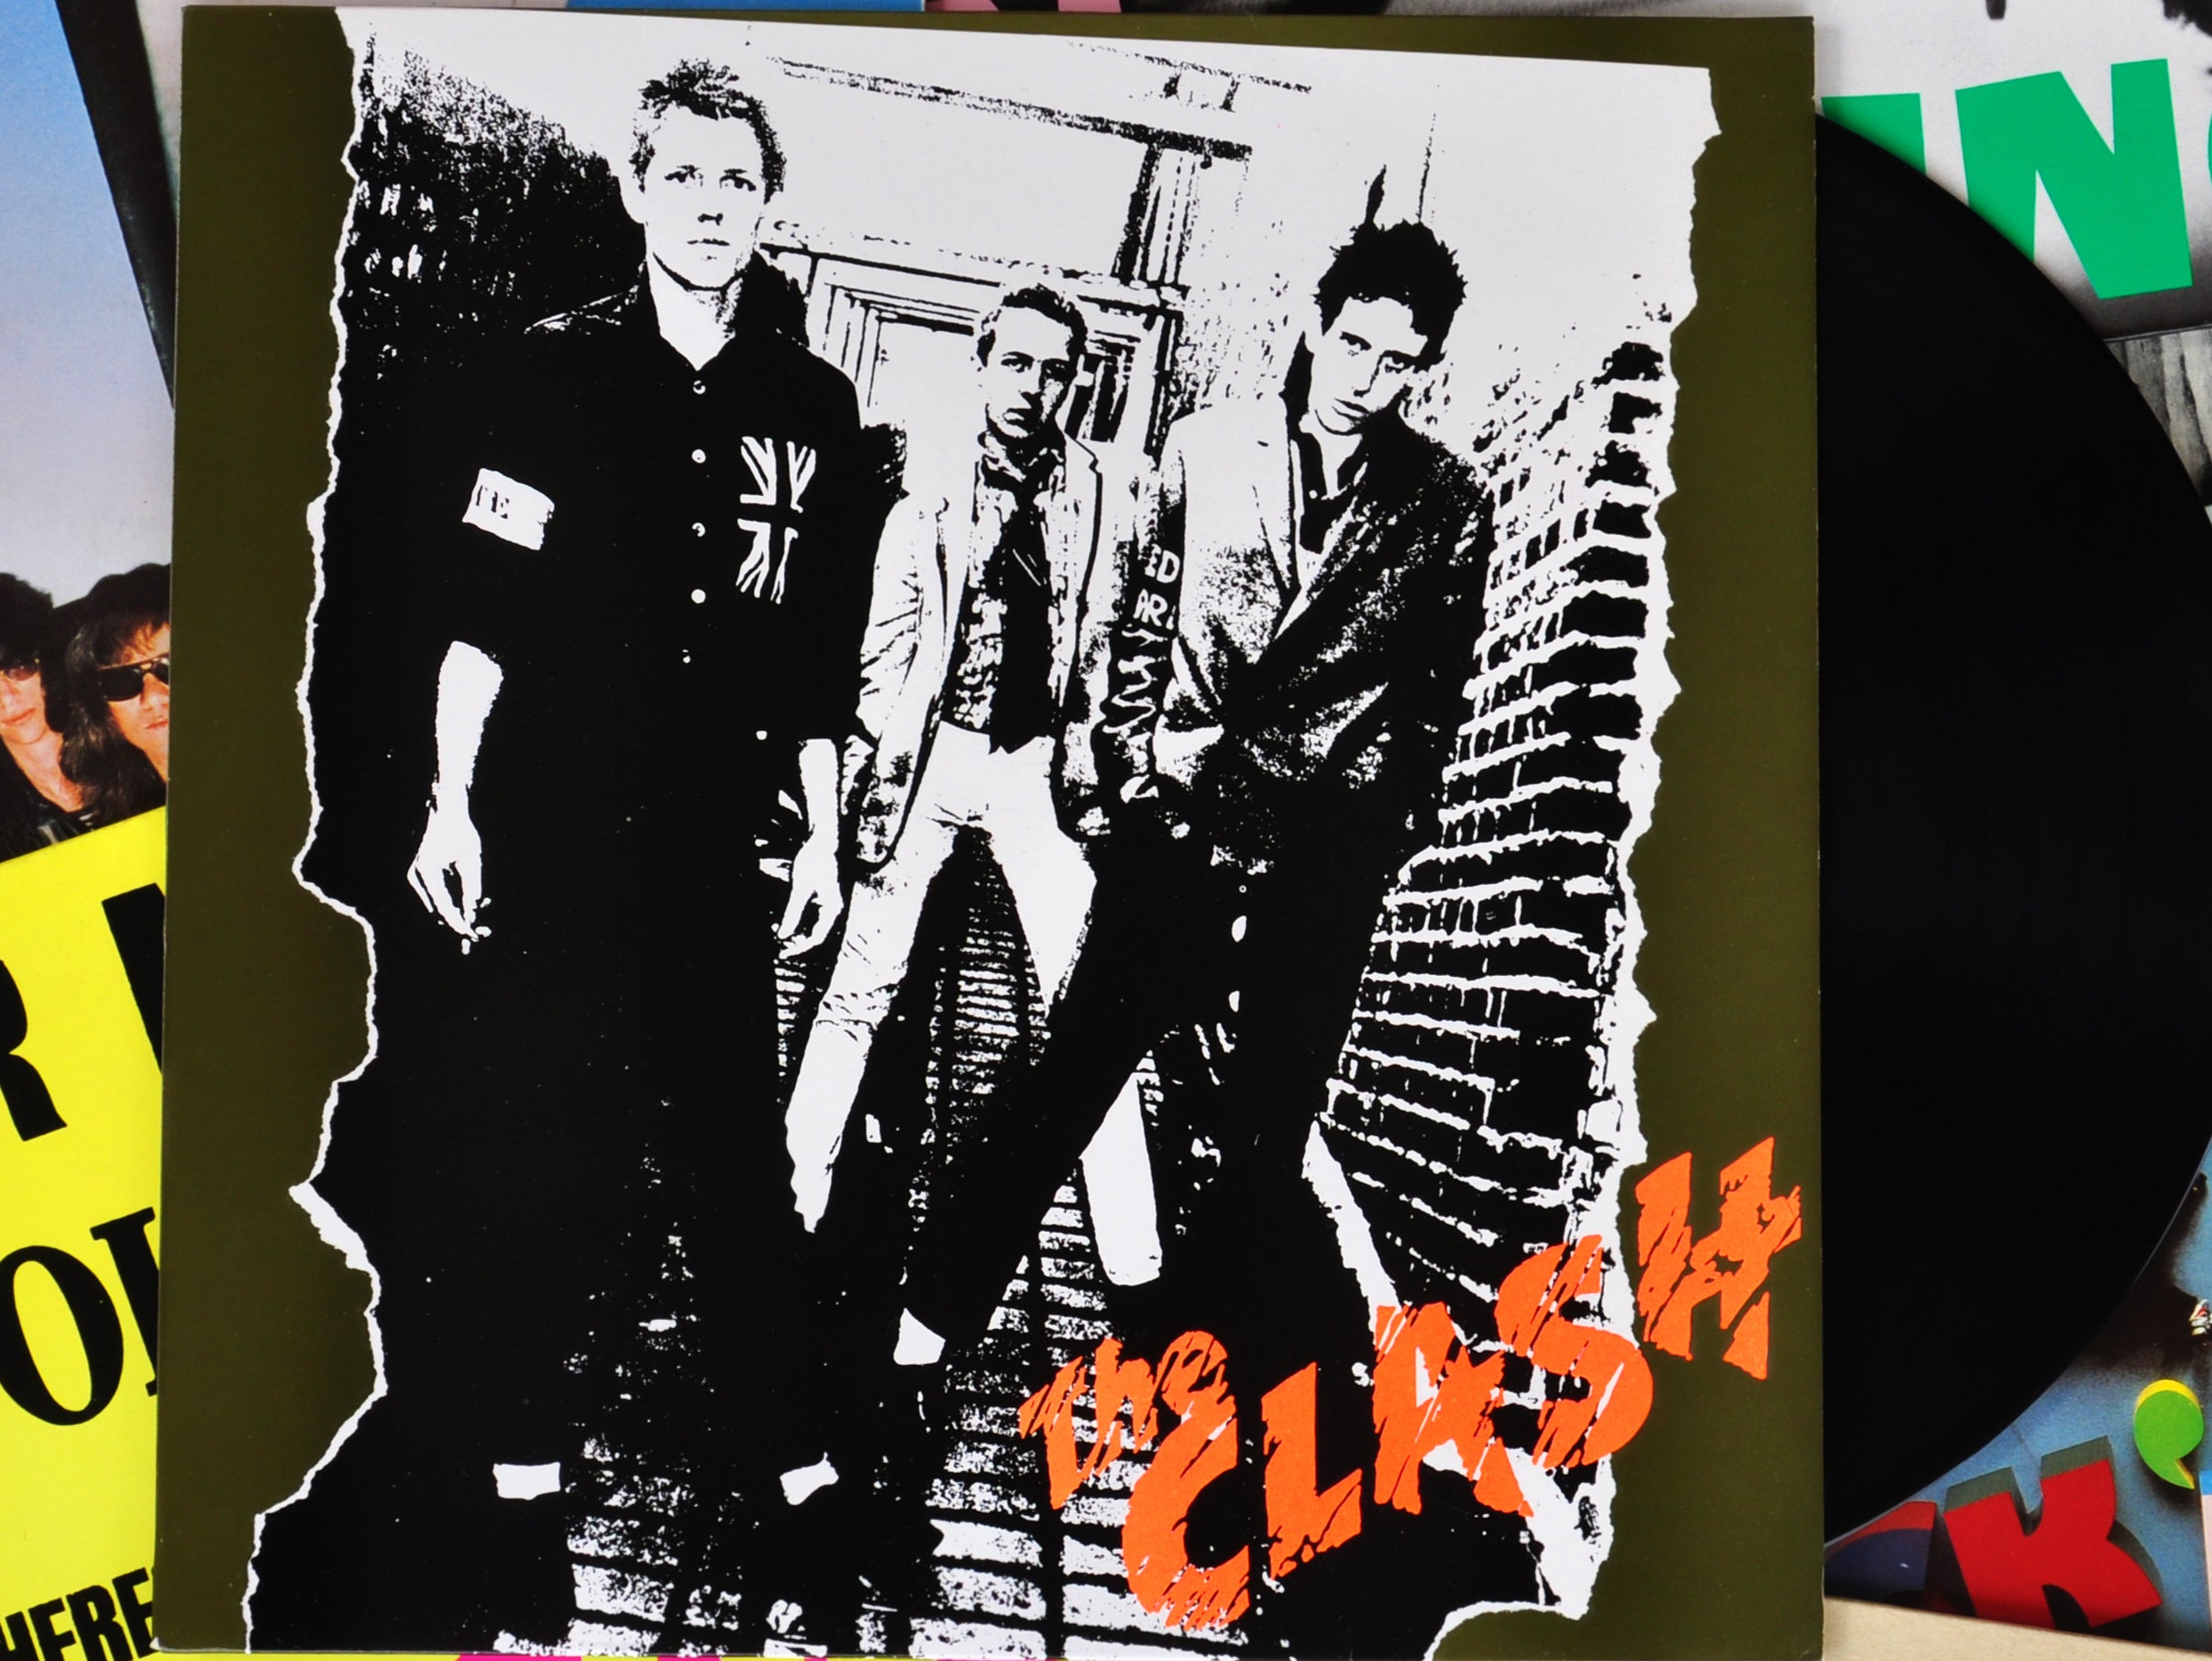 Levene cowrote a song on The Clash’s first album